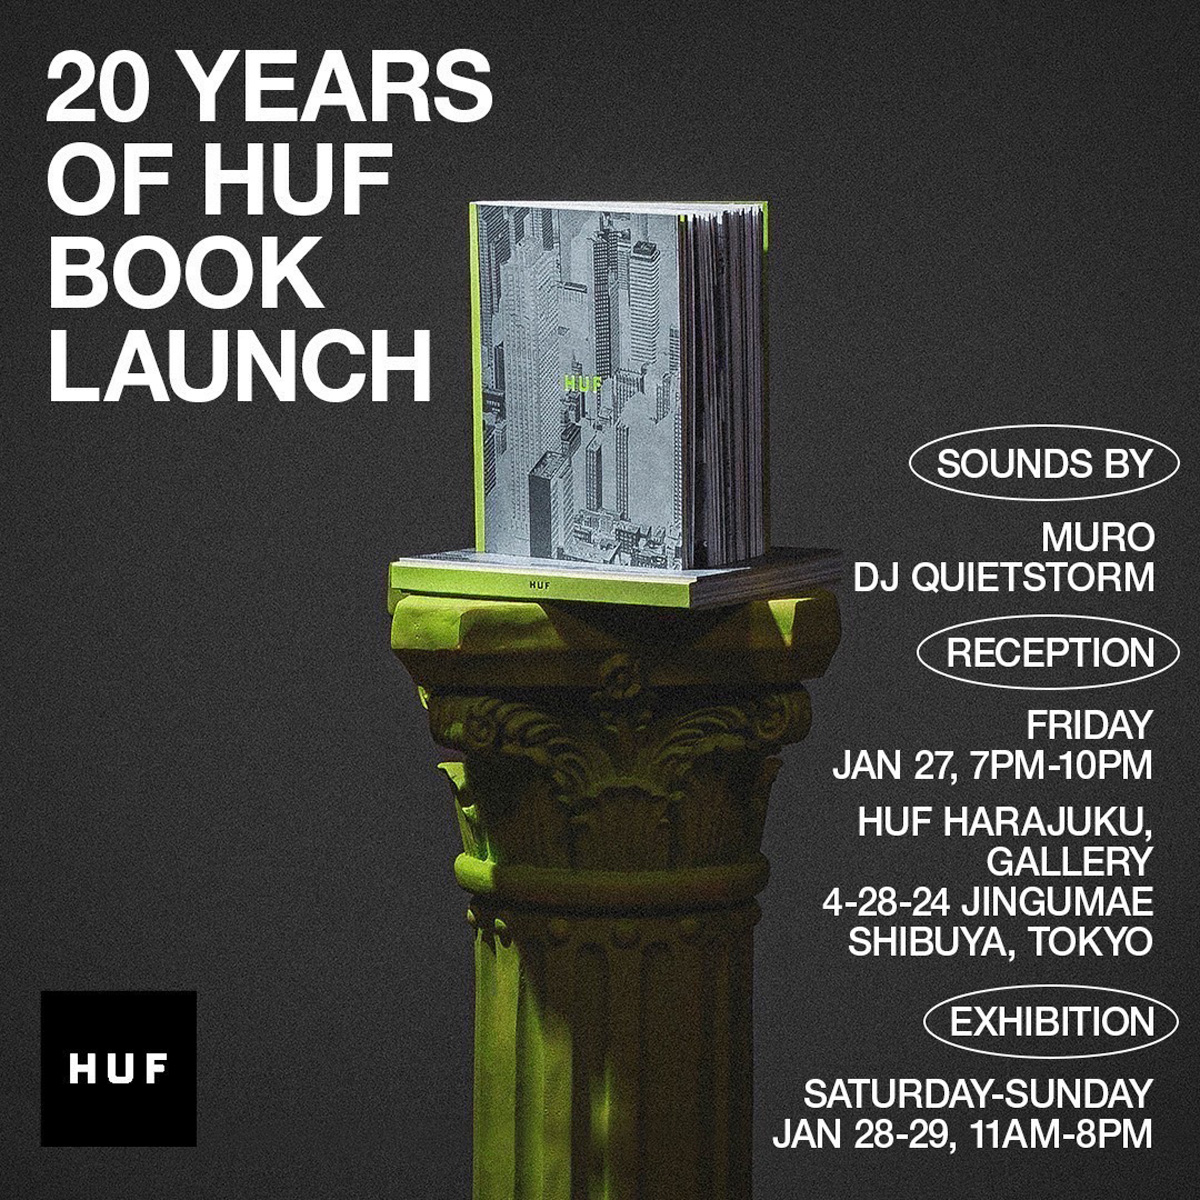 20 YEARS OF HUF HARDCOVER BOOK LAUNCH